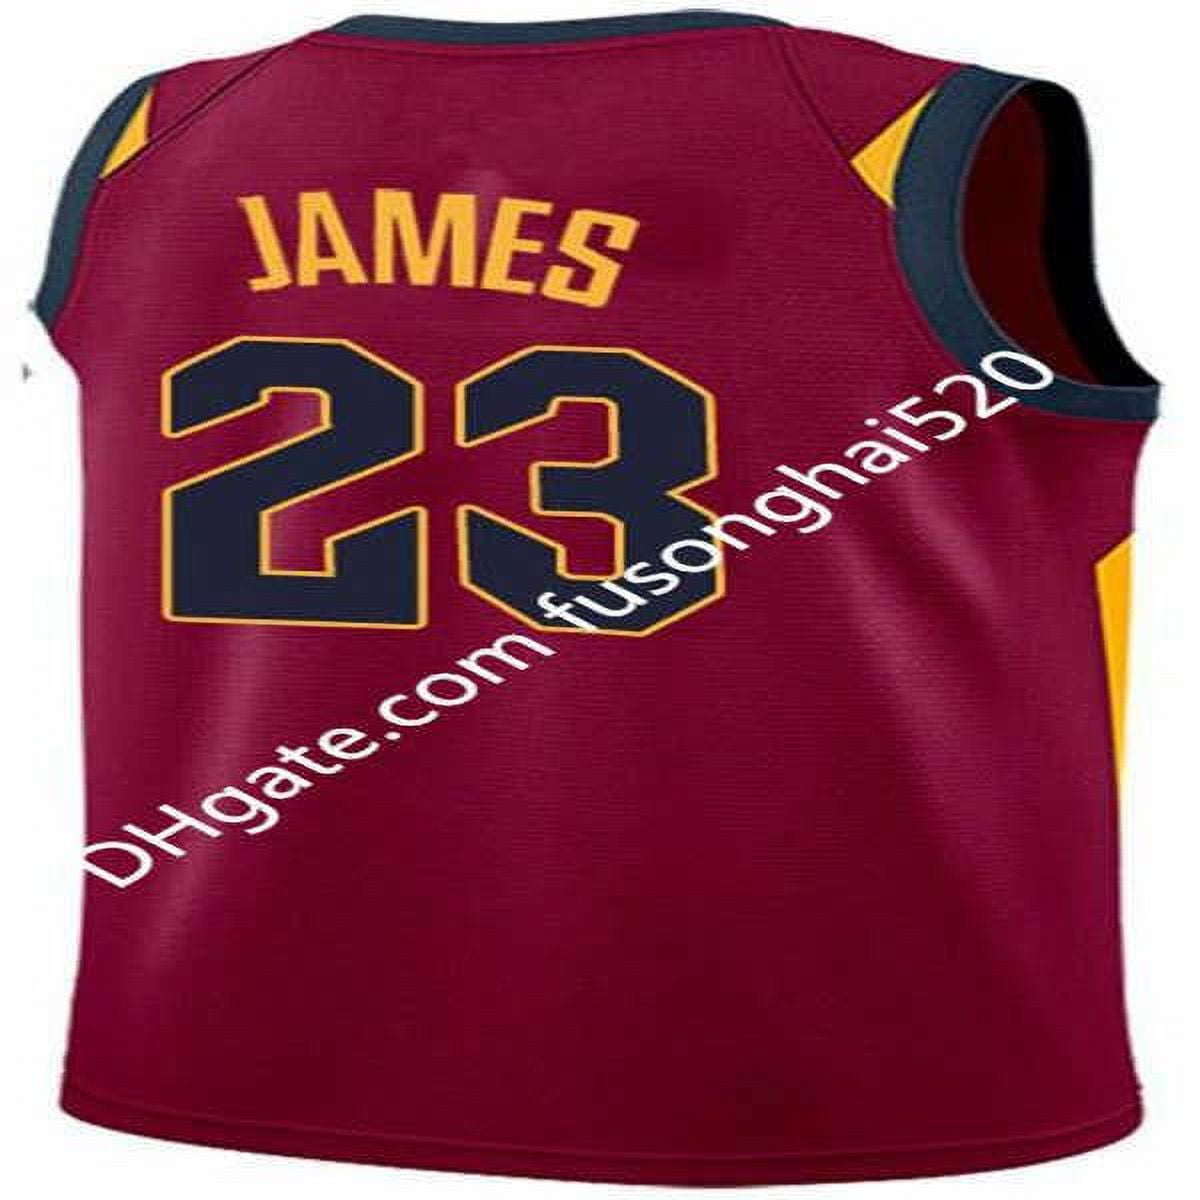 LeBron James Stitched Jersey Men's NBA Jersey Classic Edition